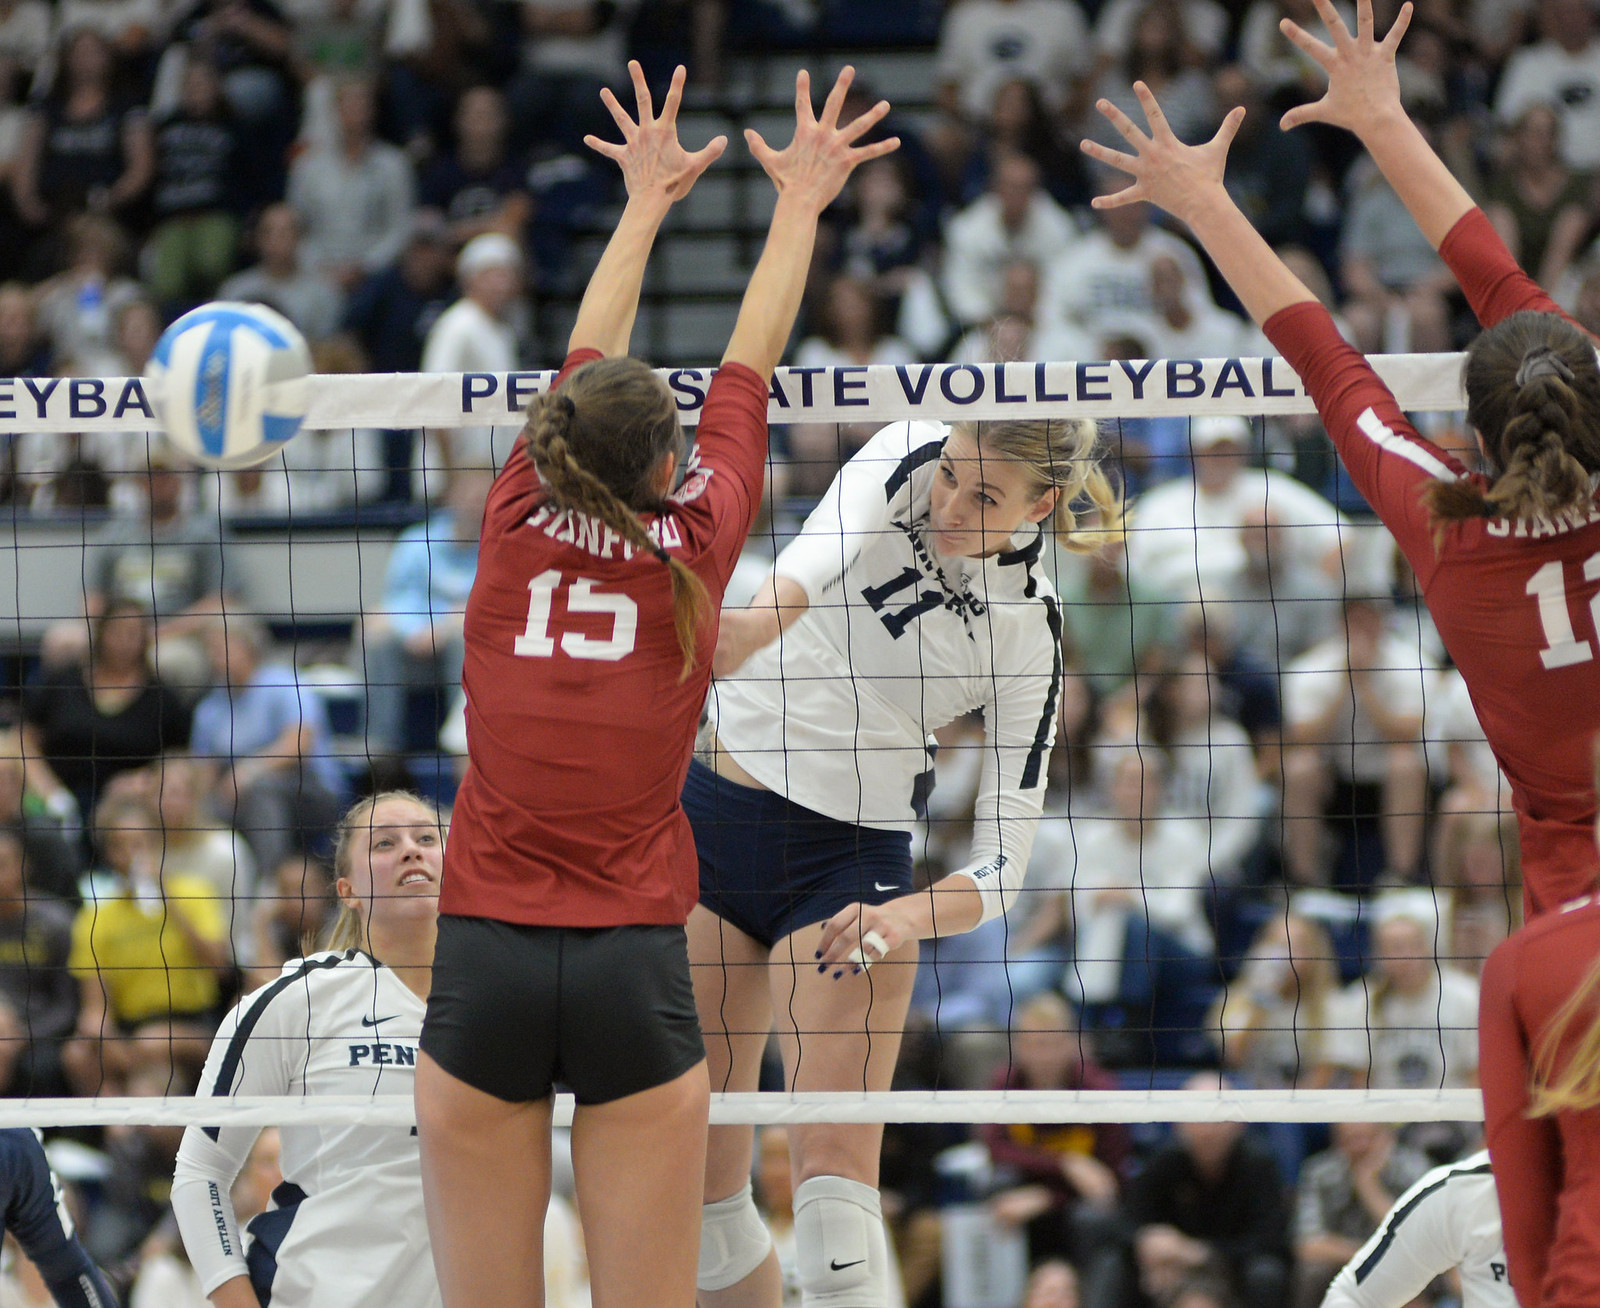 The volleyball spike is the way for a hitter to send a ball over the net past the block into the opposing court with force in an effort to score a point.  (Penn State News)